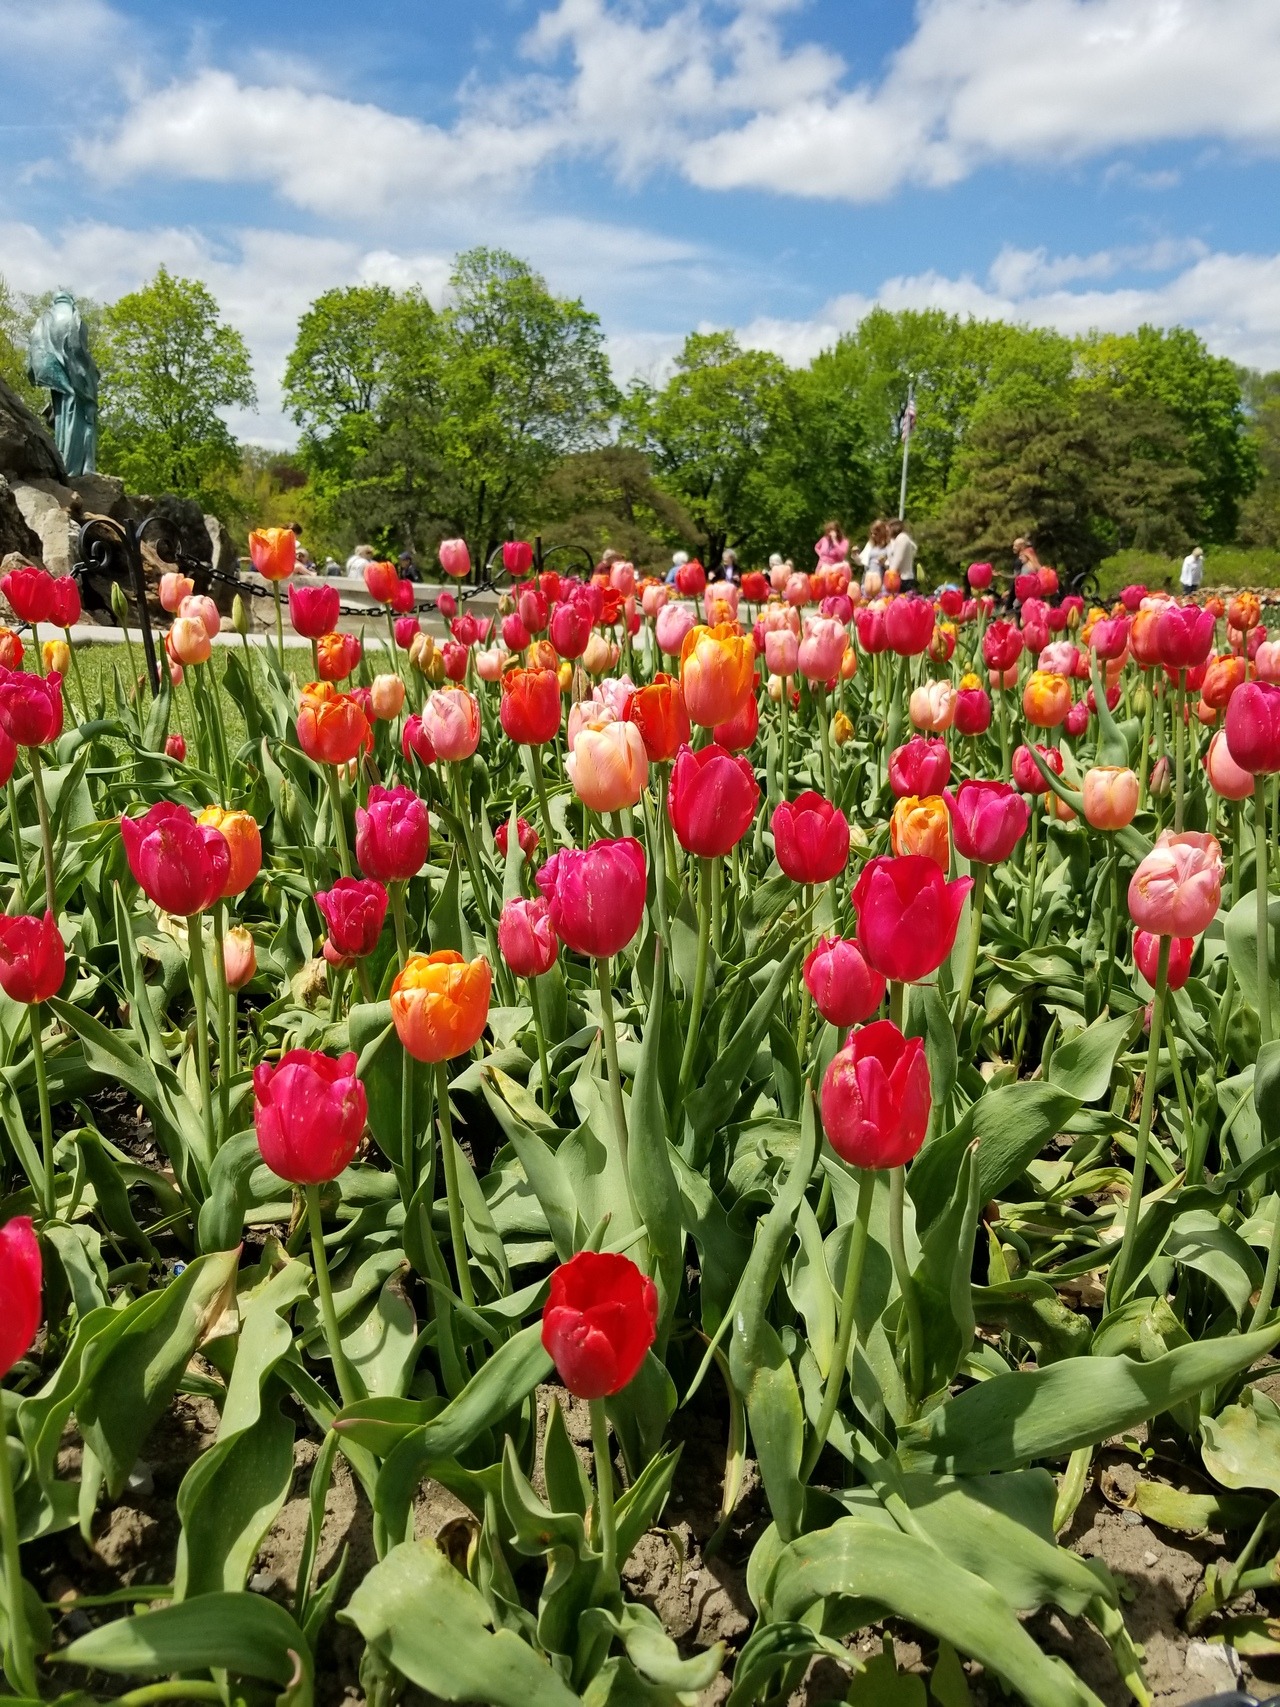 Beautiful day in the park with my love, @celticknot65 tip-toeing through the tulips!